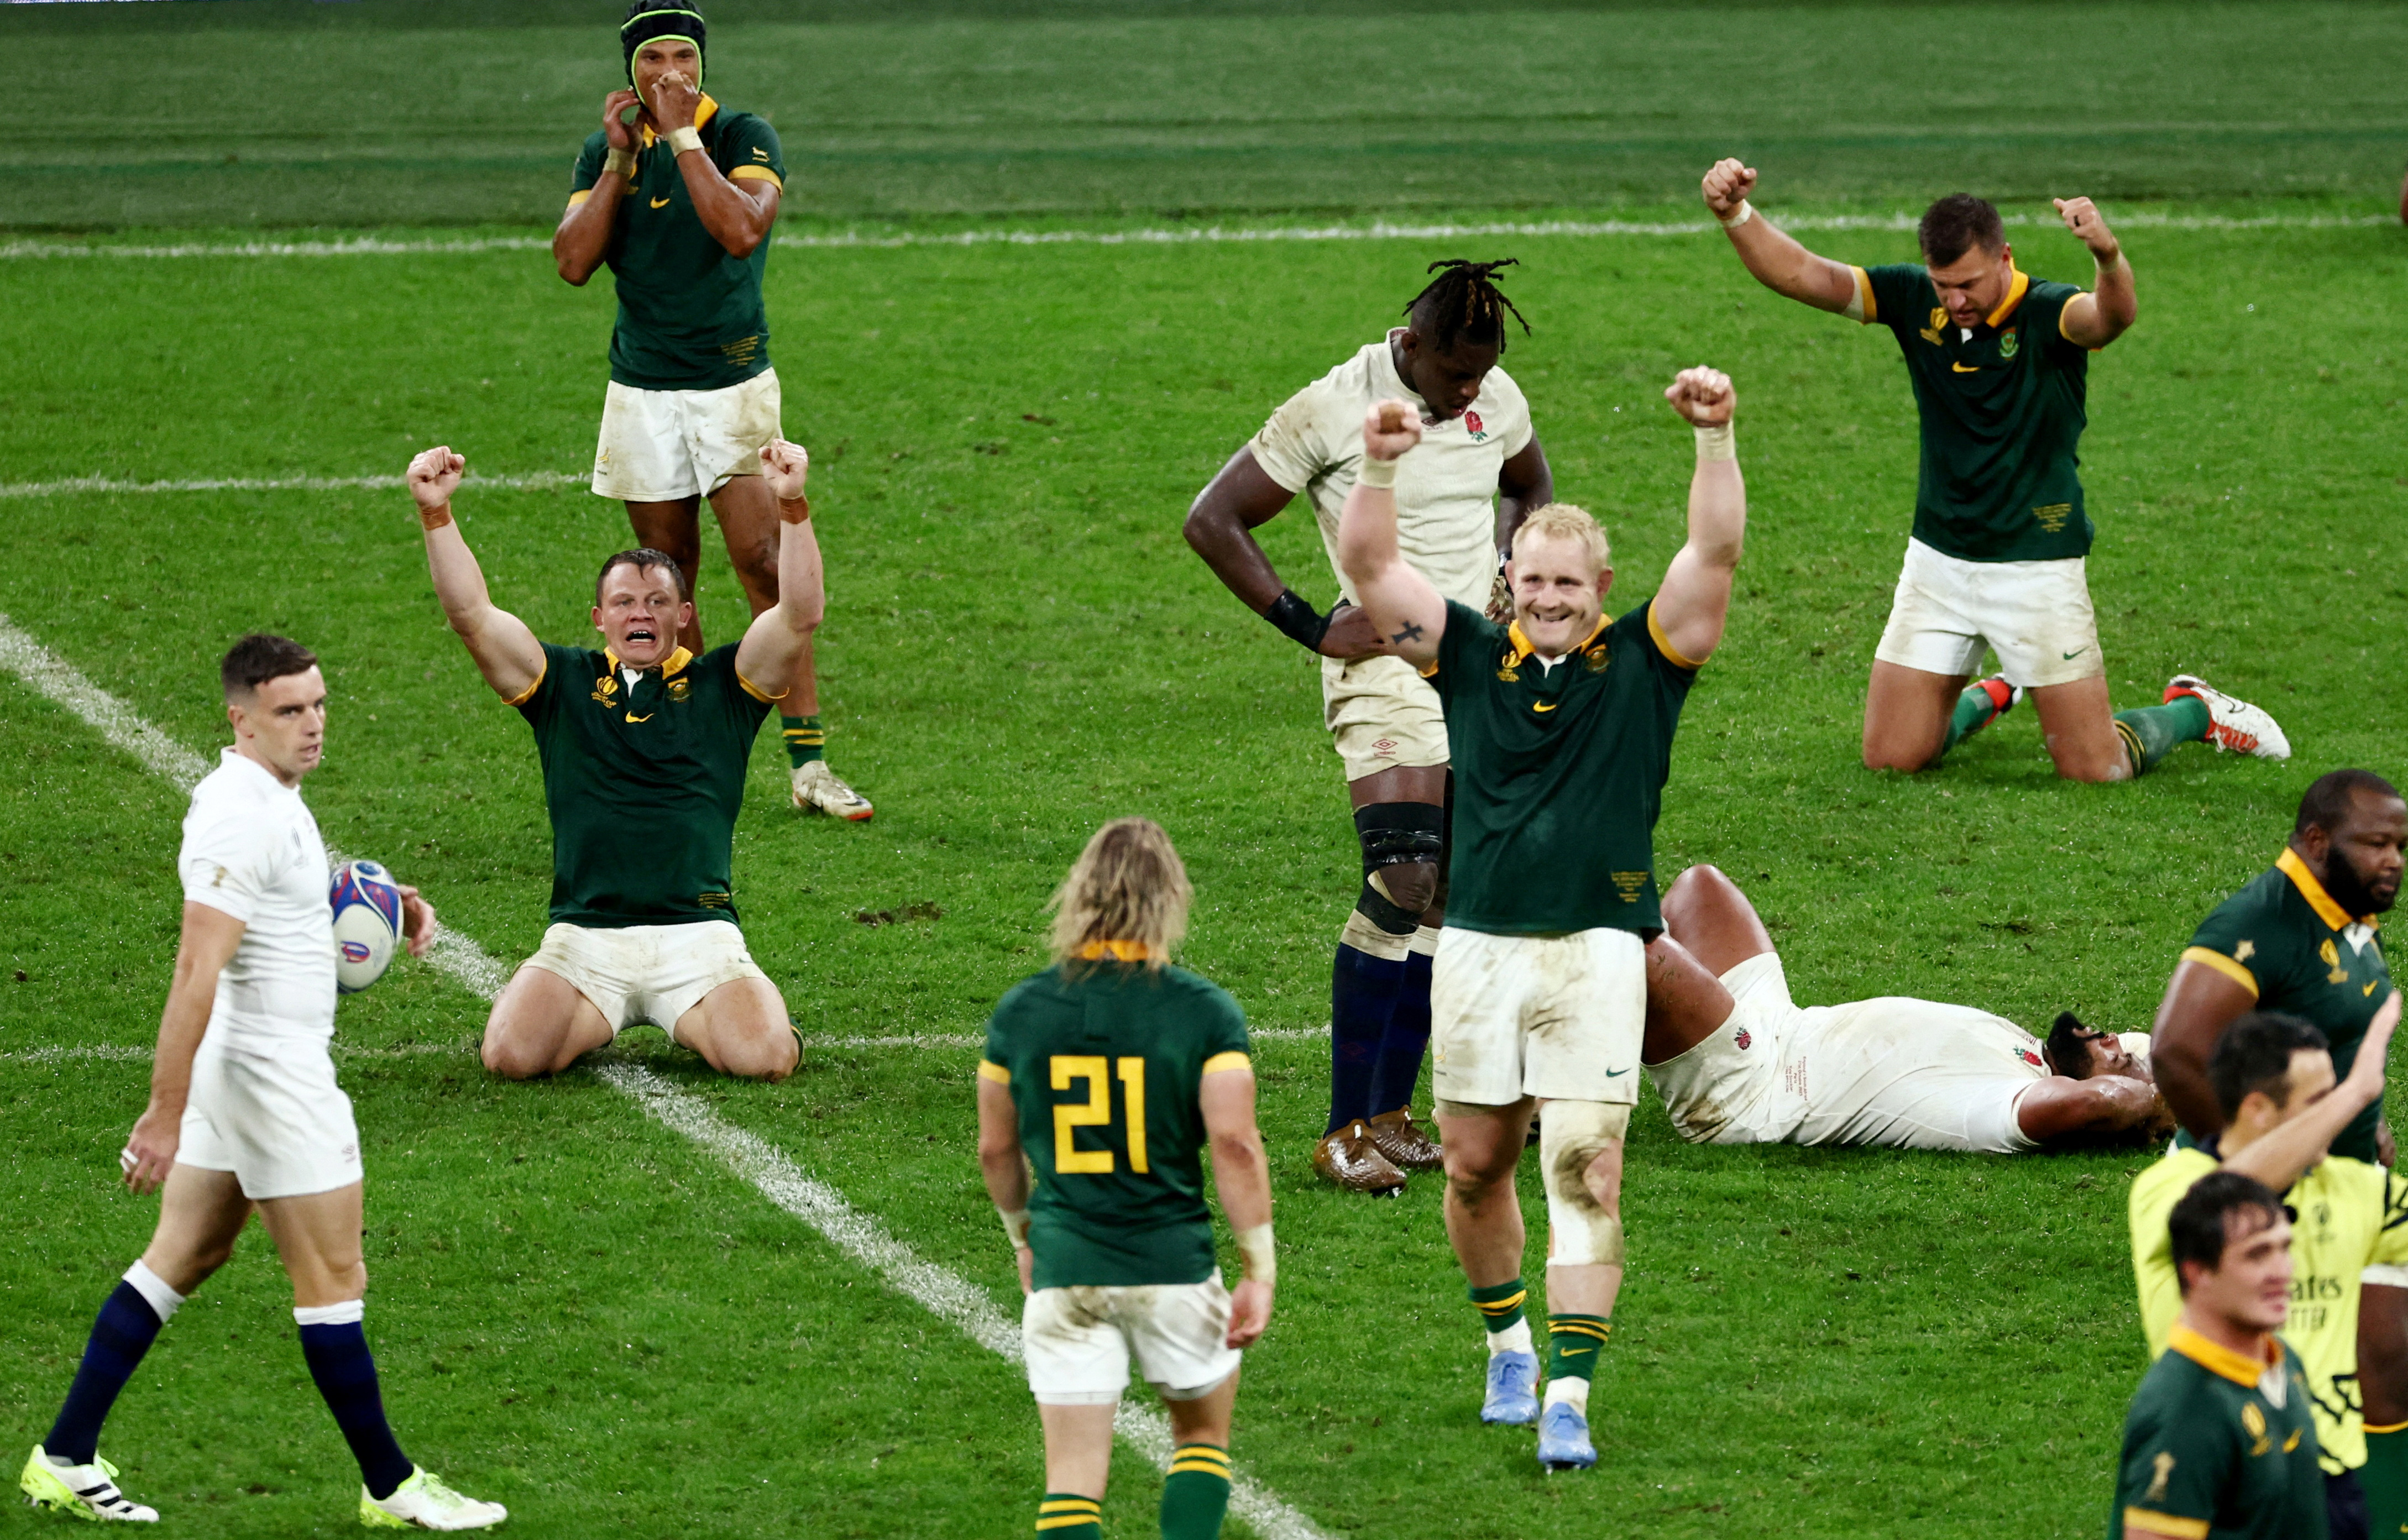 Relief for South Africa with credit to England after ugly performance Reuters